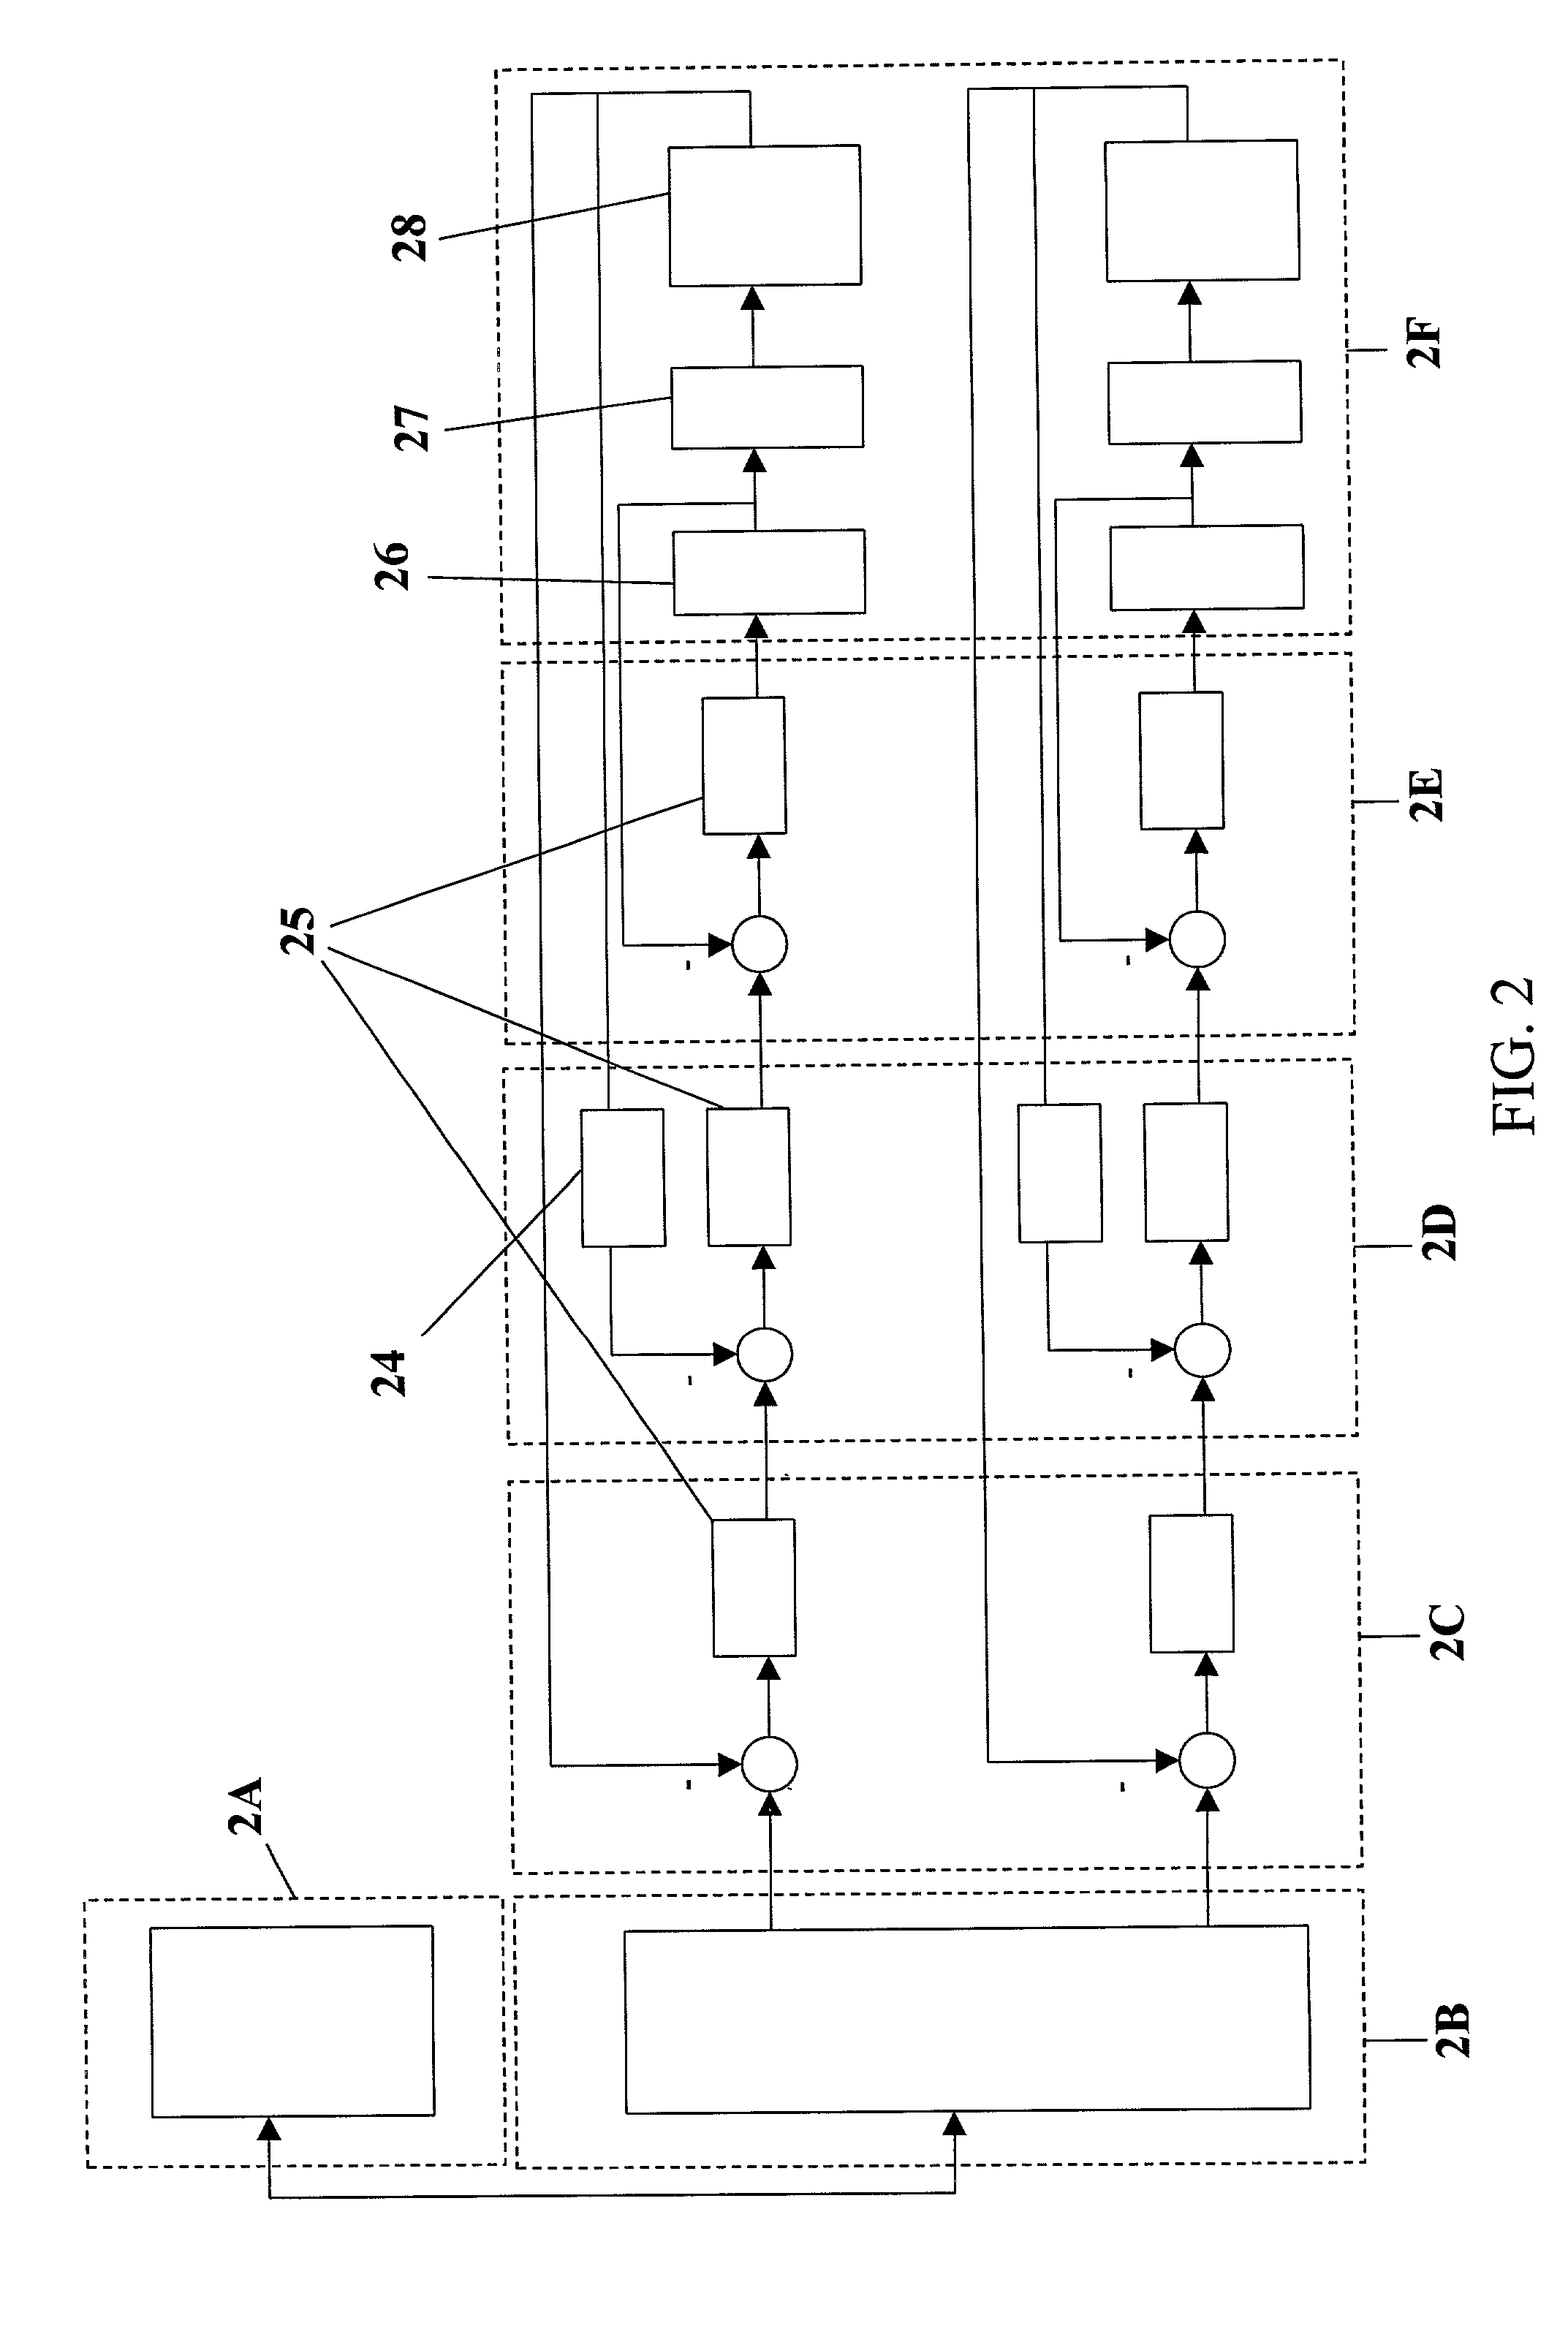 System for motion control, method of using the system for motion control, and computer-readable instructions for use with the system for motion control